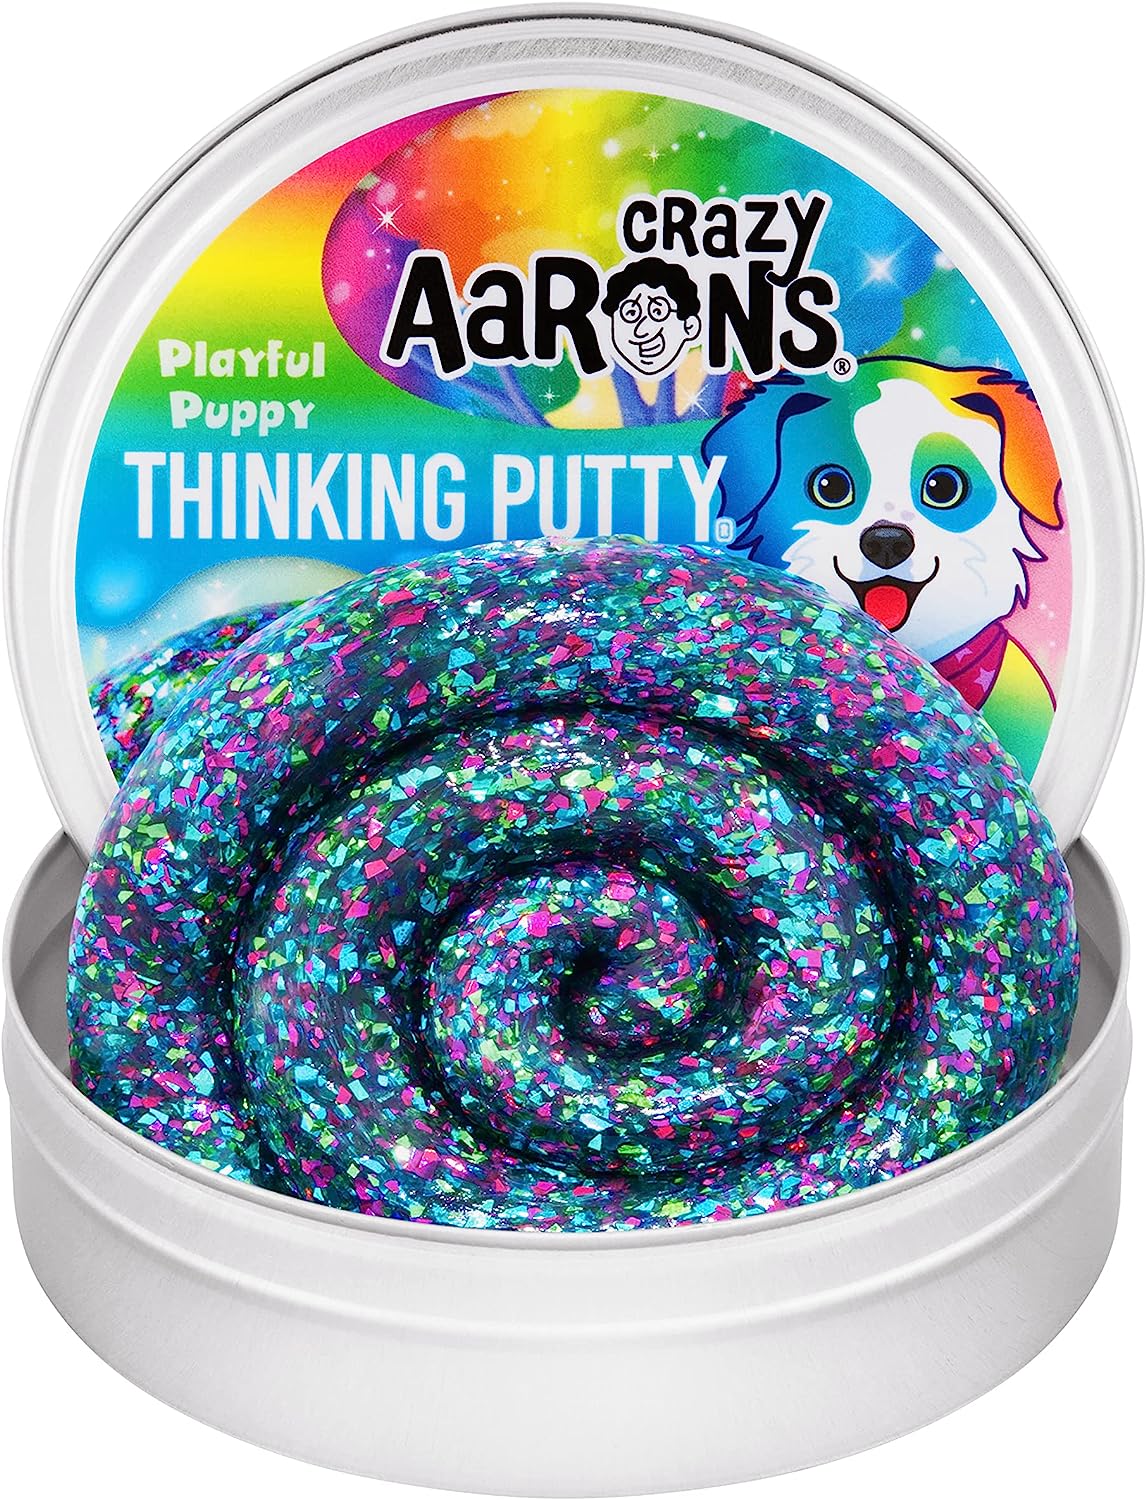 Crazy Aaron's Thinking Putty : Playful Puppy